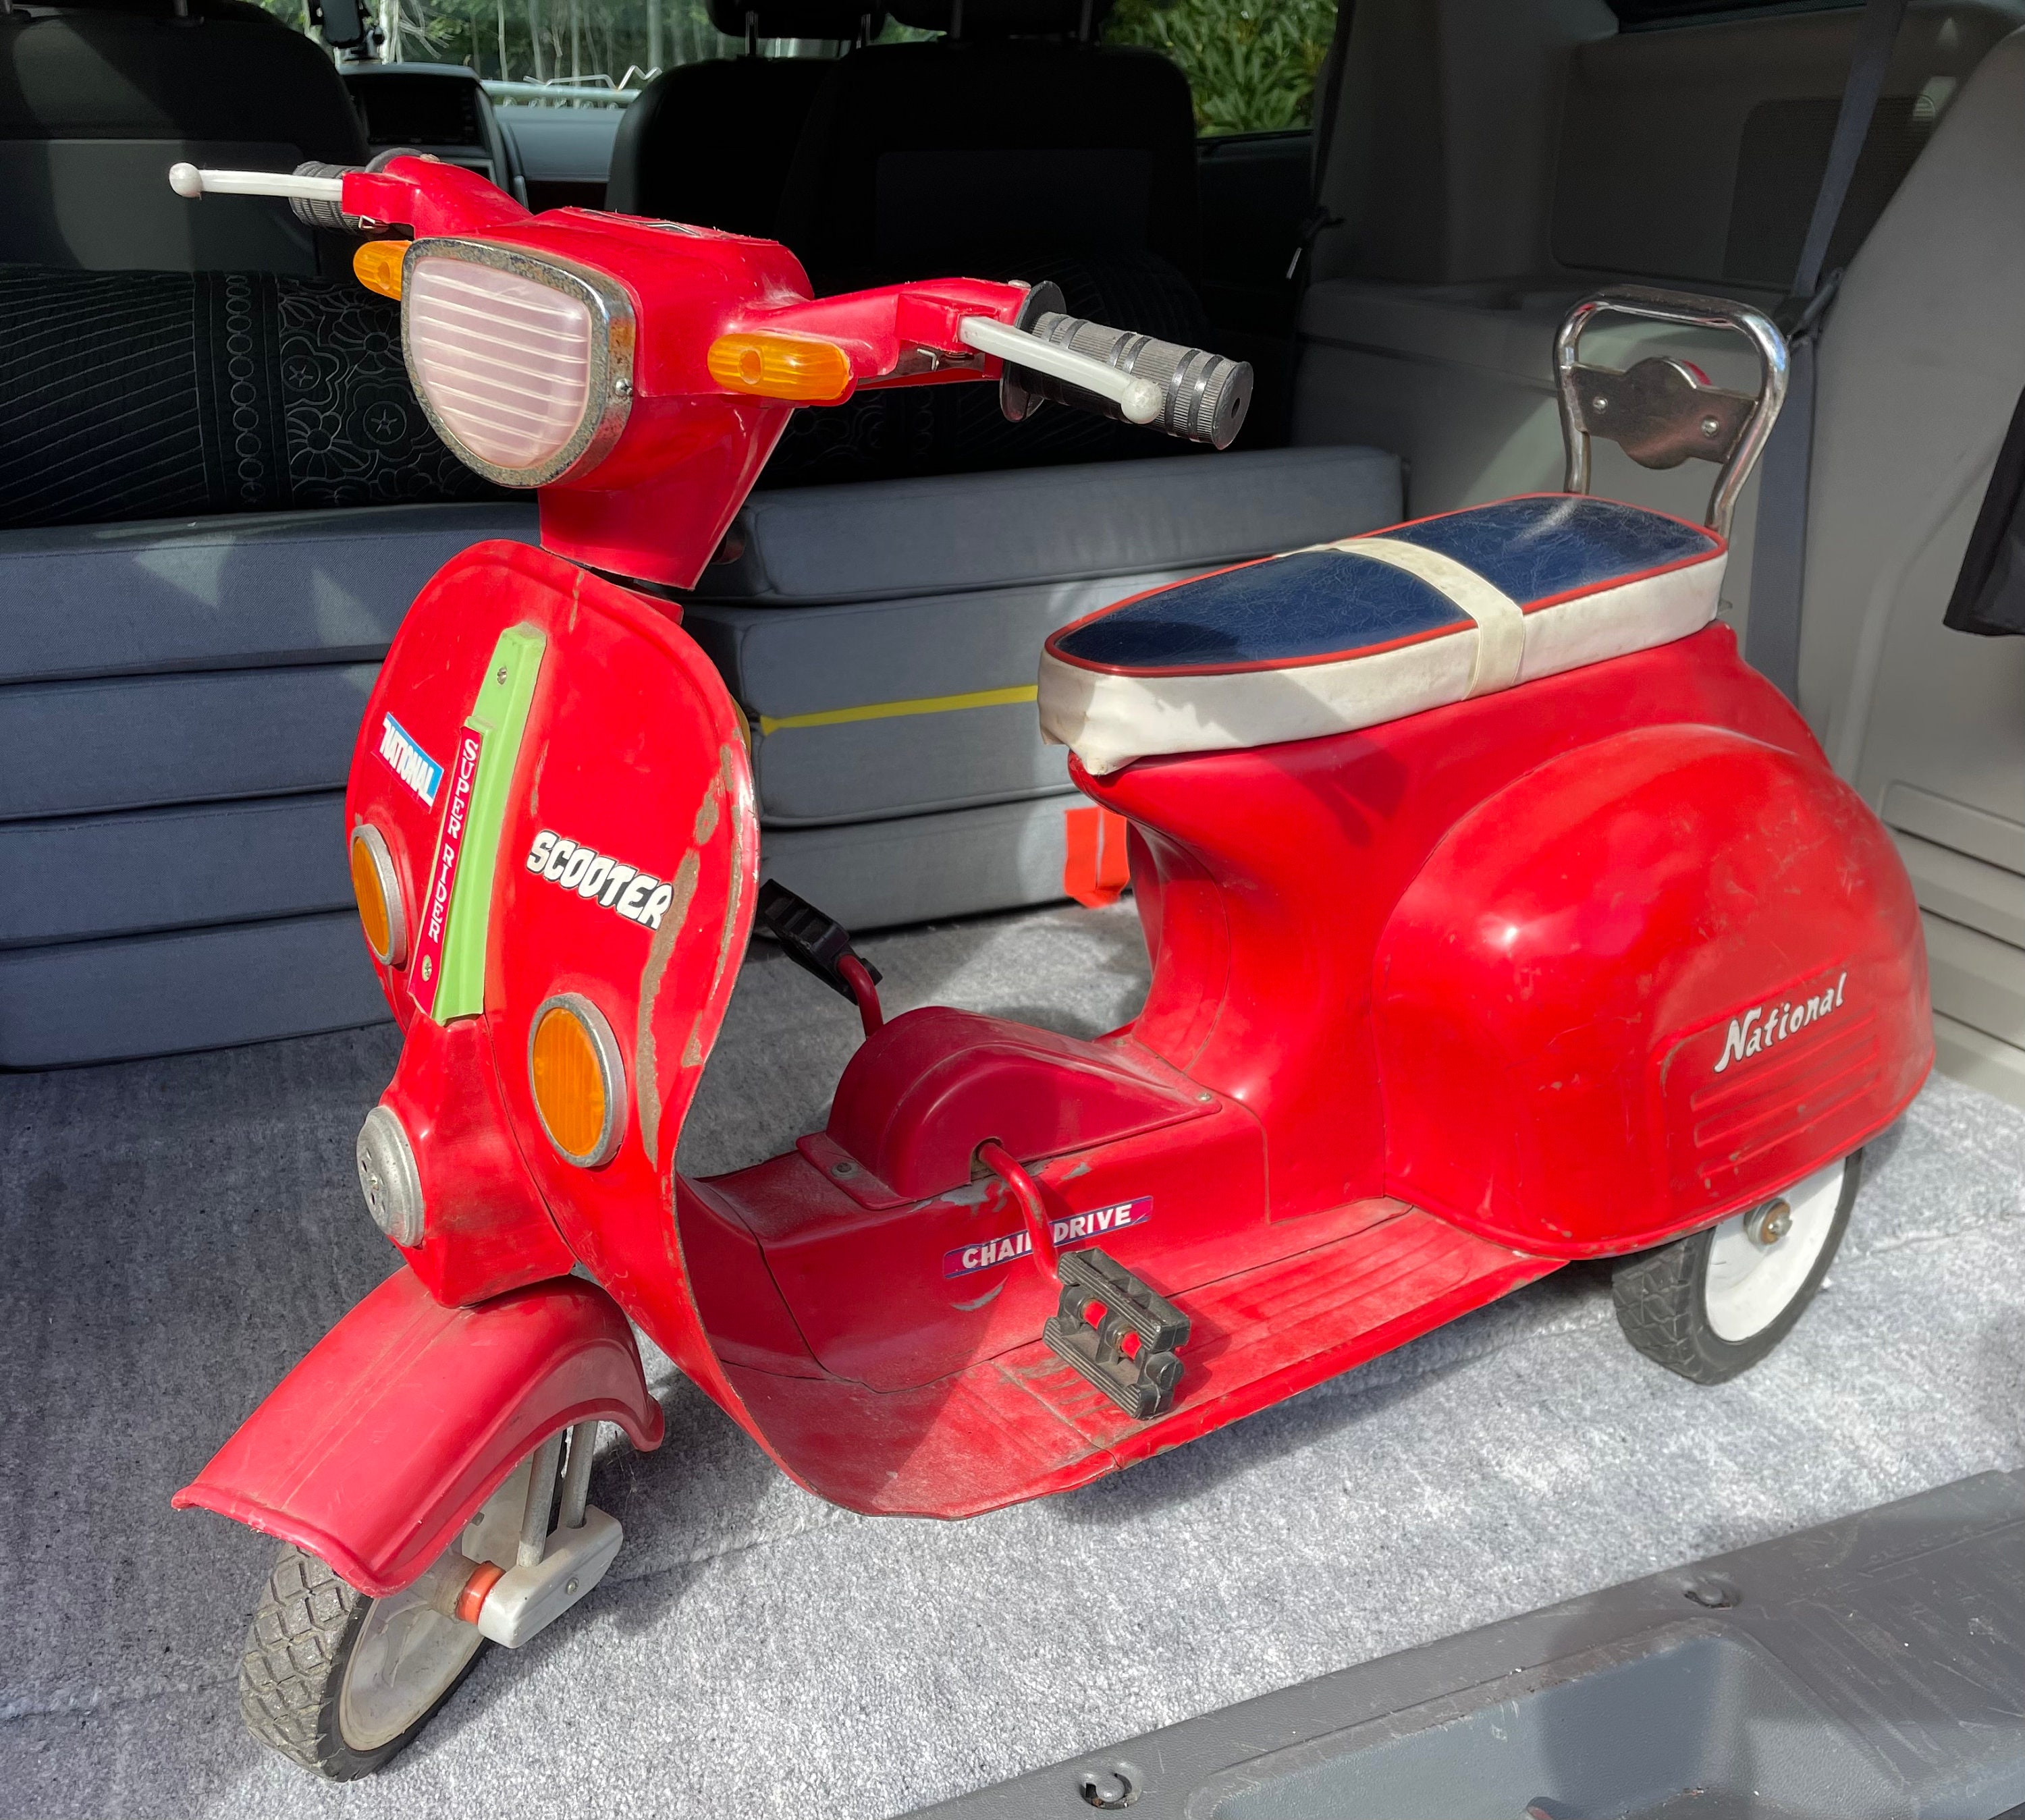 Craftsman styling miniature vespa after painting in home-based